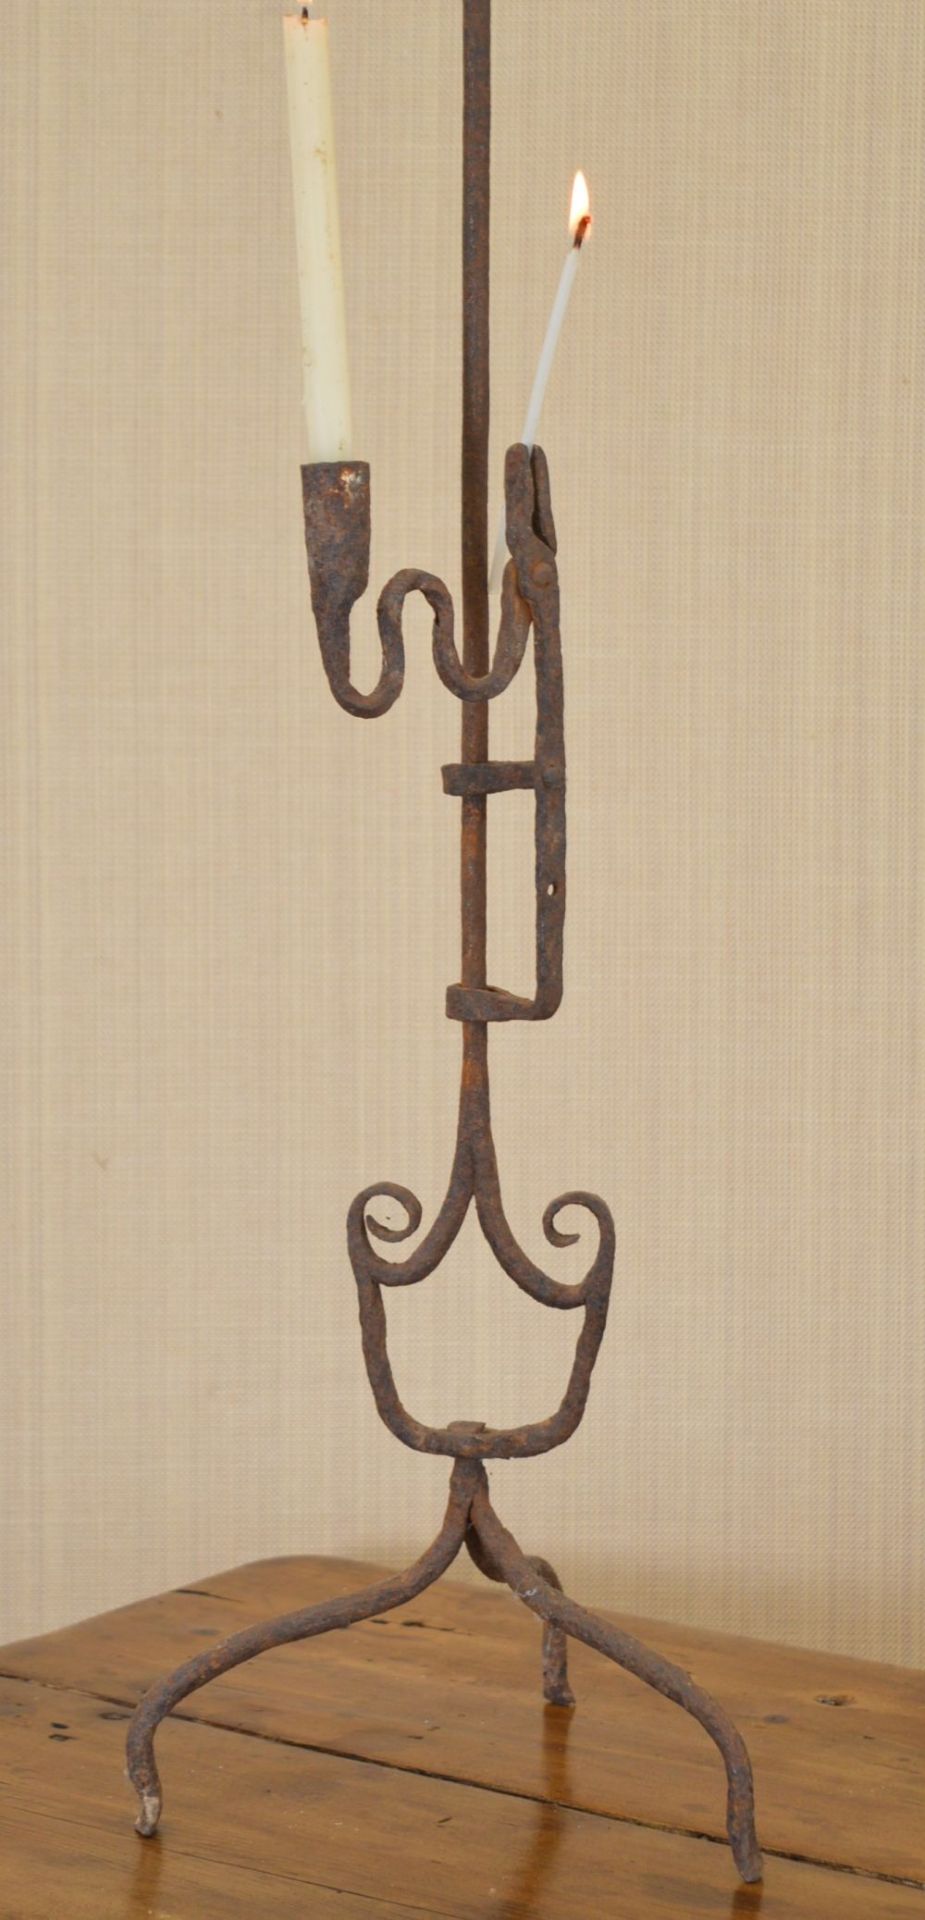 EARLY 19TH-CENTURY FORGED IRON FLOOR STANDING RUSH LIGHT